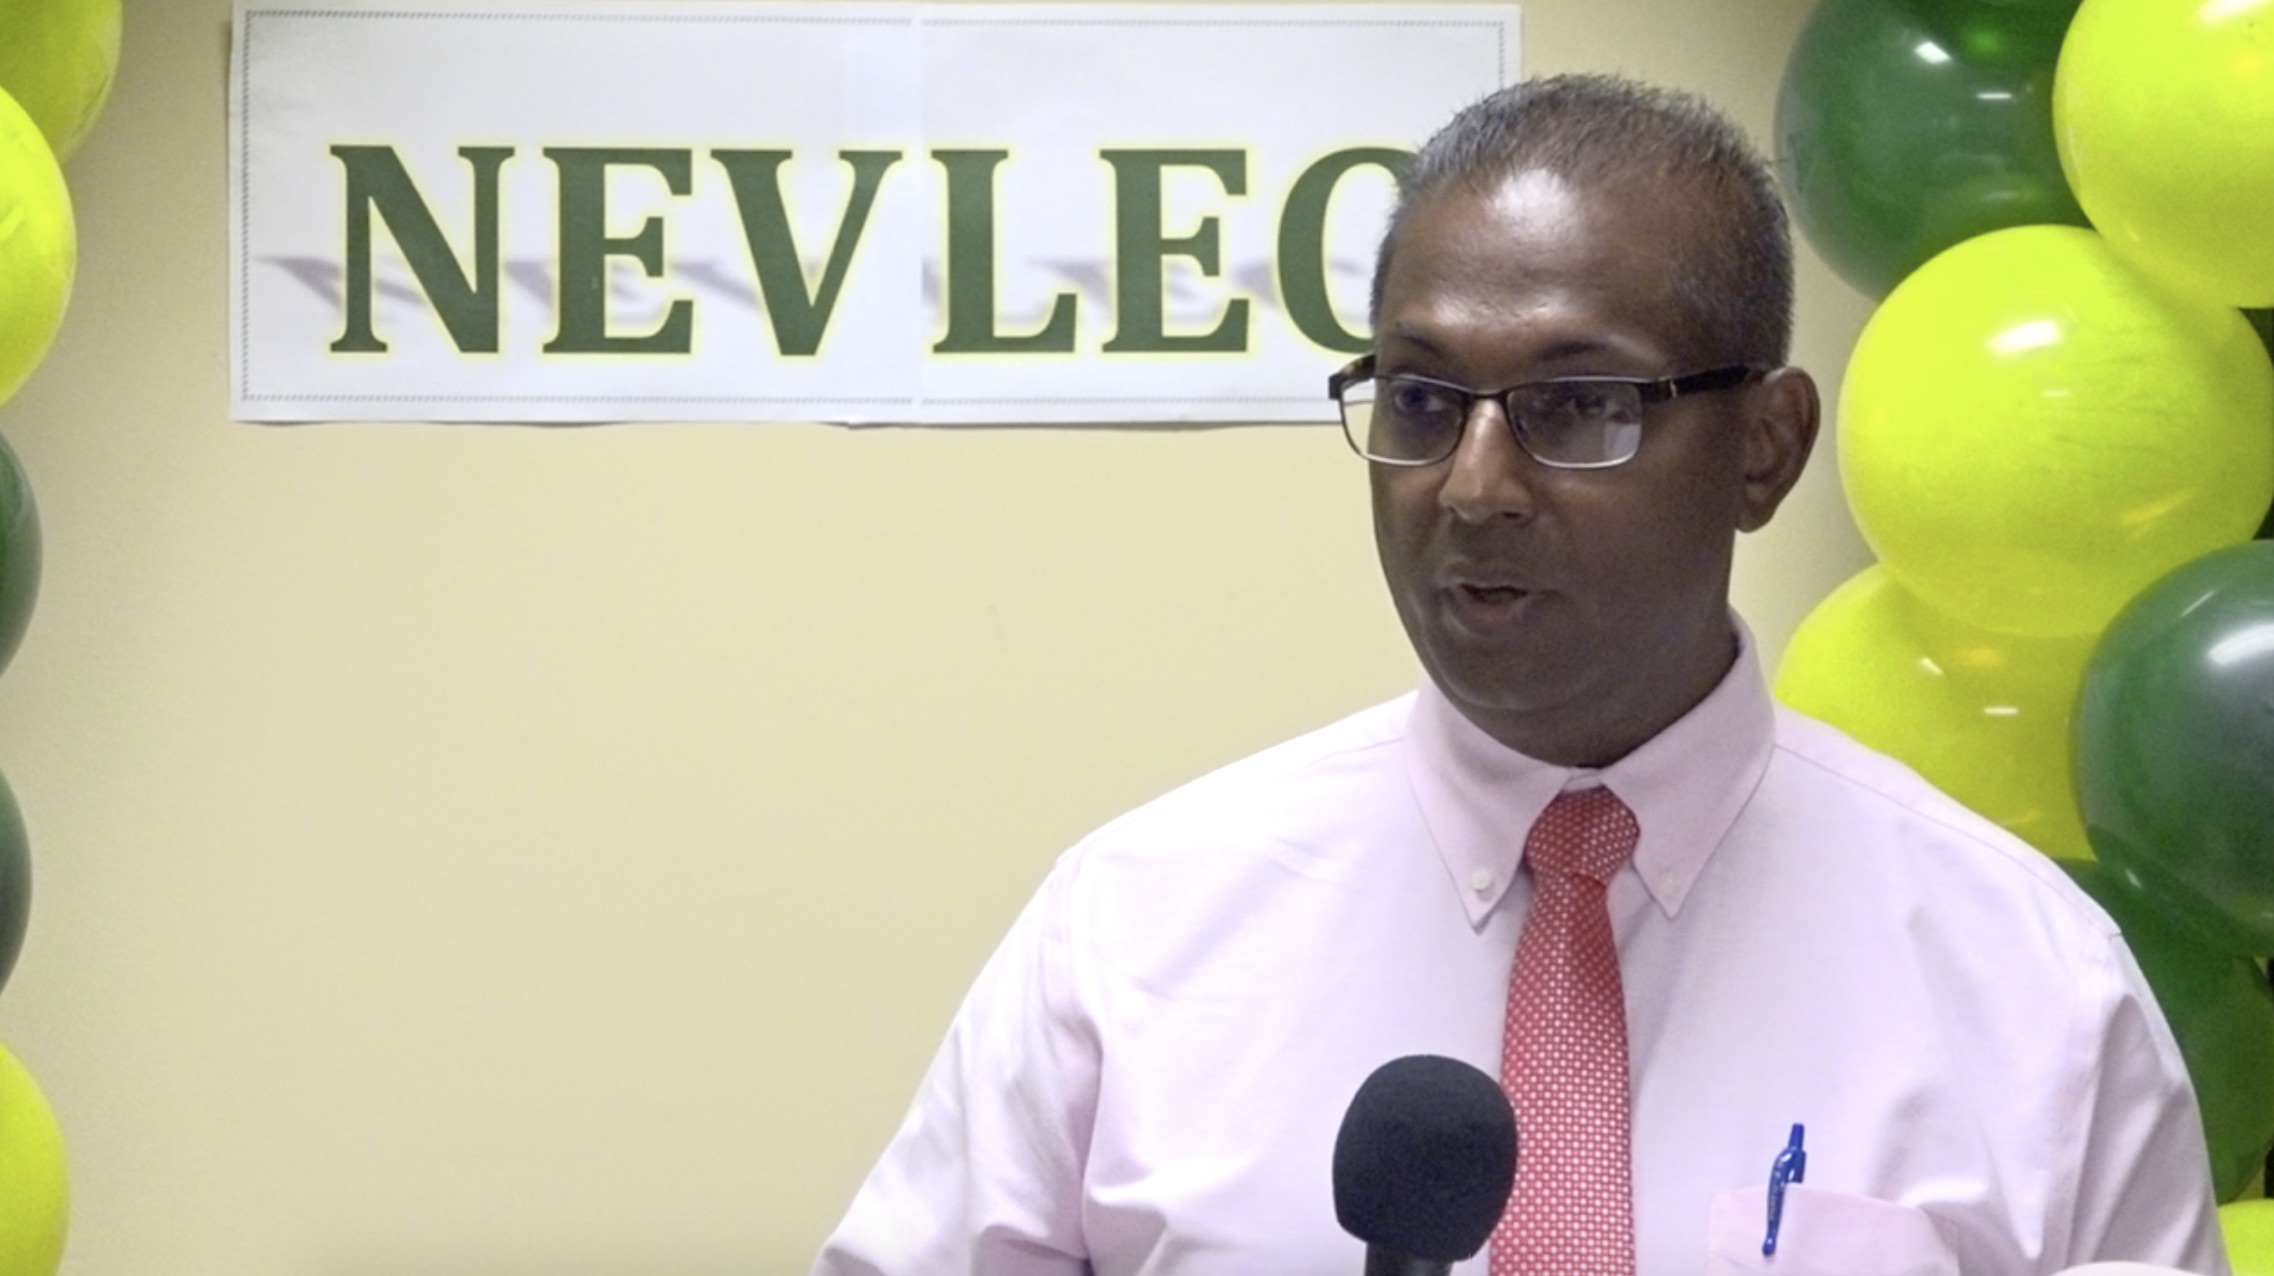 Mr. Gilroy Pultie, General Manager of the Nevis Electricity Company Limited delivering remarks at a handing over ceremony at the company’s board room on August 26, 2020